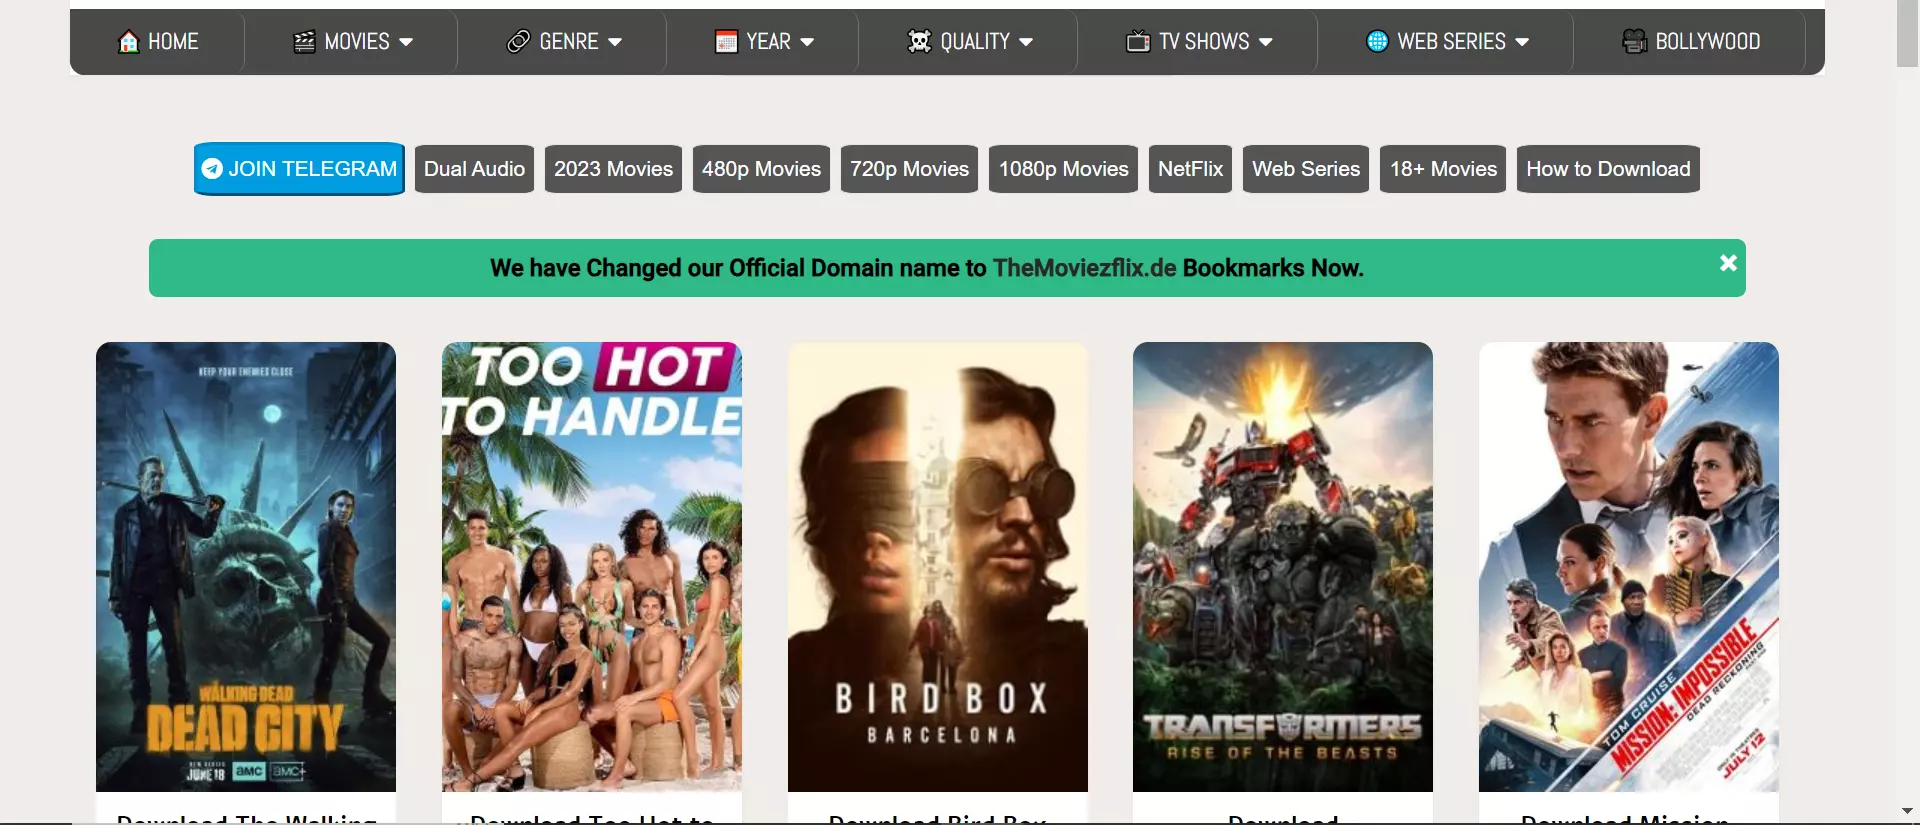 Moviesflix 2023 - Download Latest HD Movies, TV Shows, Web Series